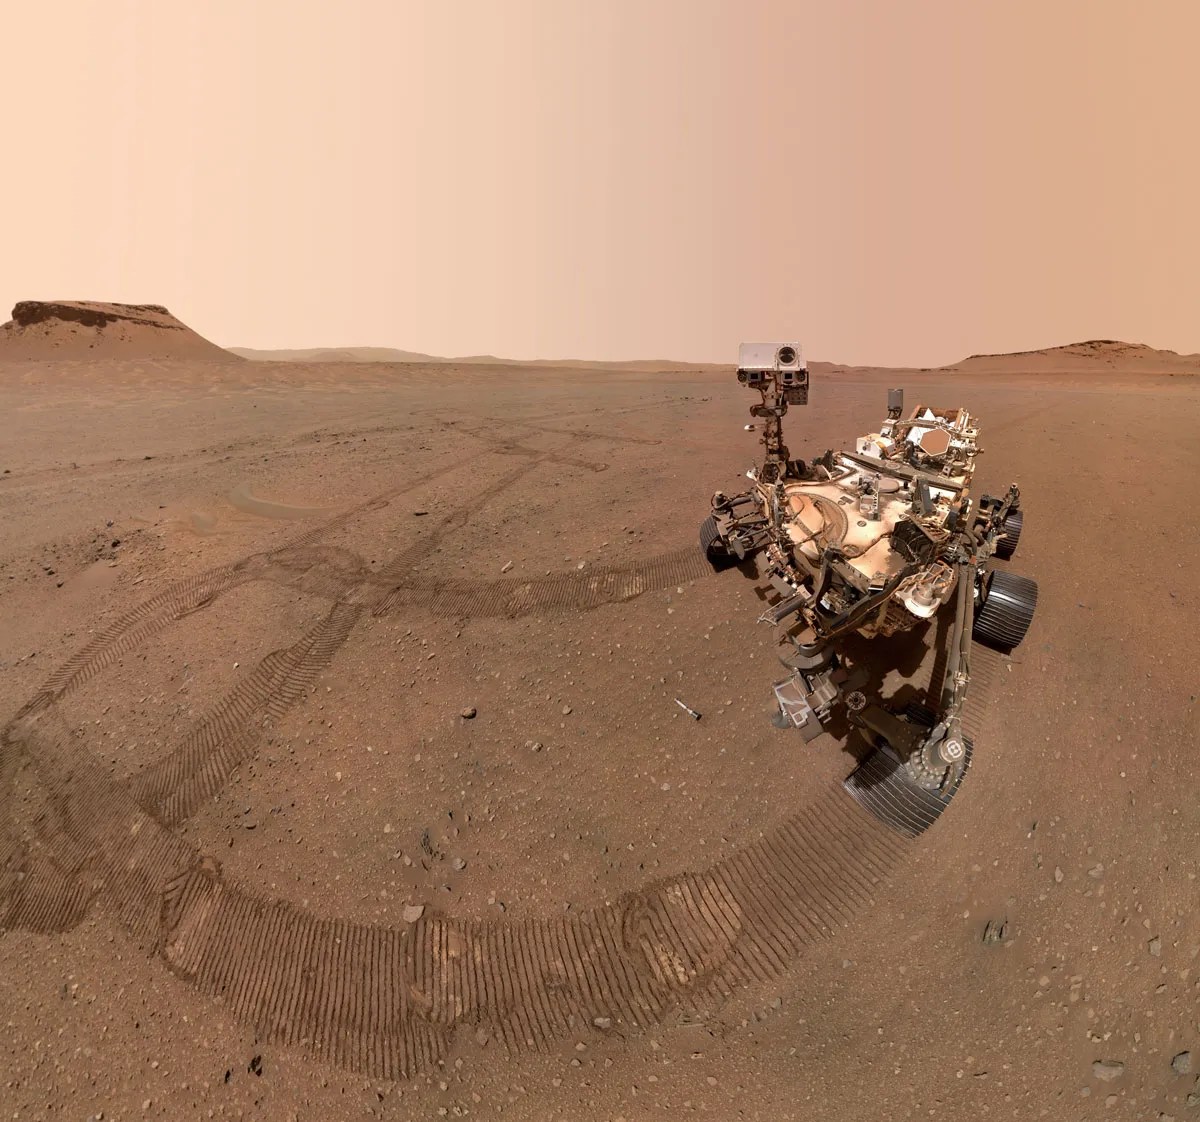 Da Perseverizzle Rover is parked among tha tracks it made up in tha soil of Mars.